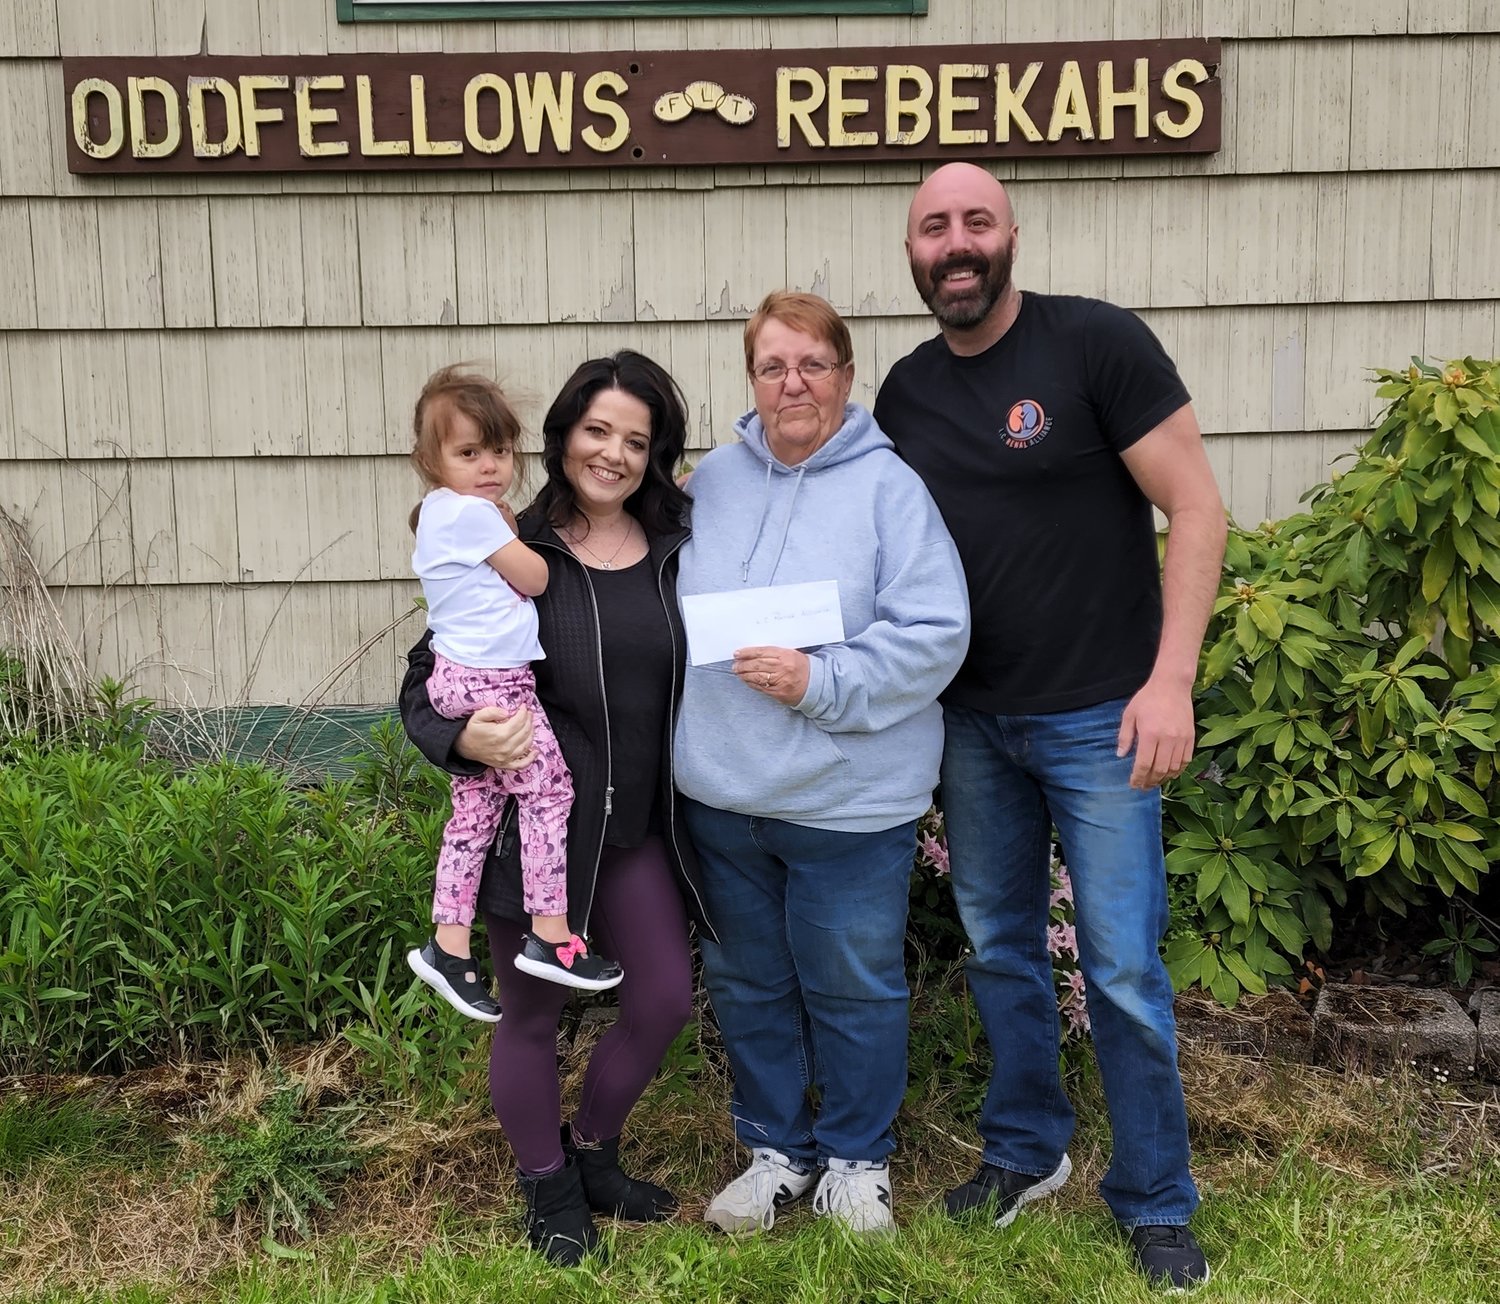 The L.C. Renal Alliance is a non-profit organization formed by Chris and Danielle Rovito after their daughter, Lawsyn, was diagnosed with Focal Segmental Glomerulosclerosis (FSGS).